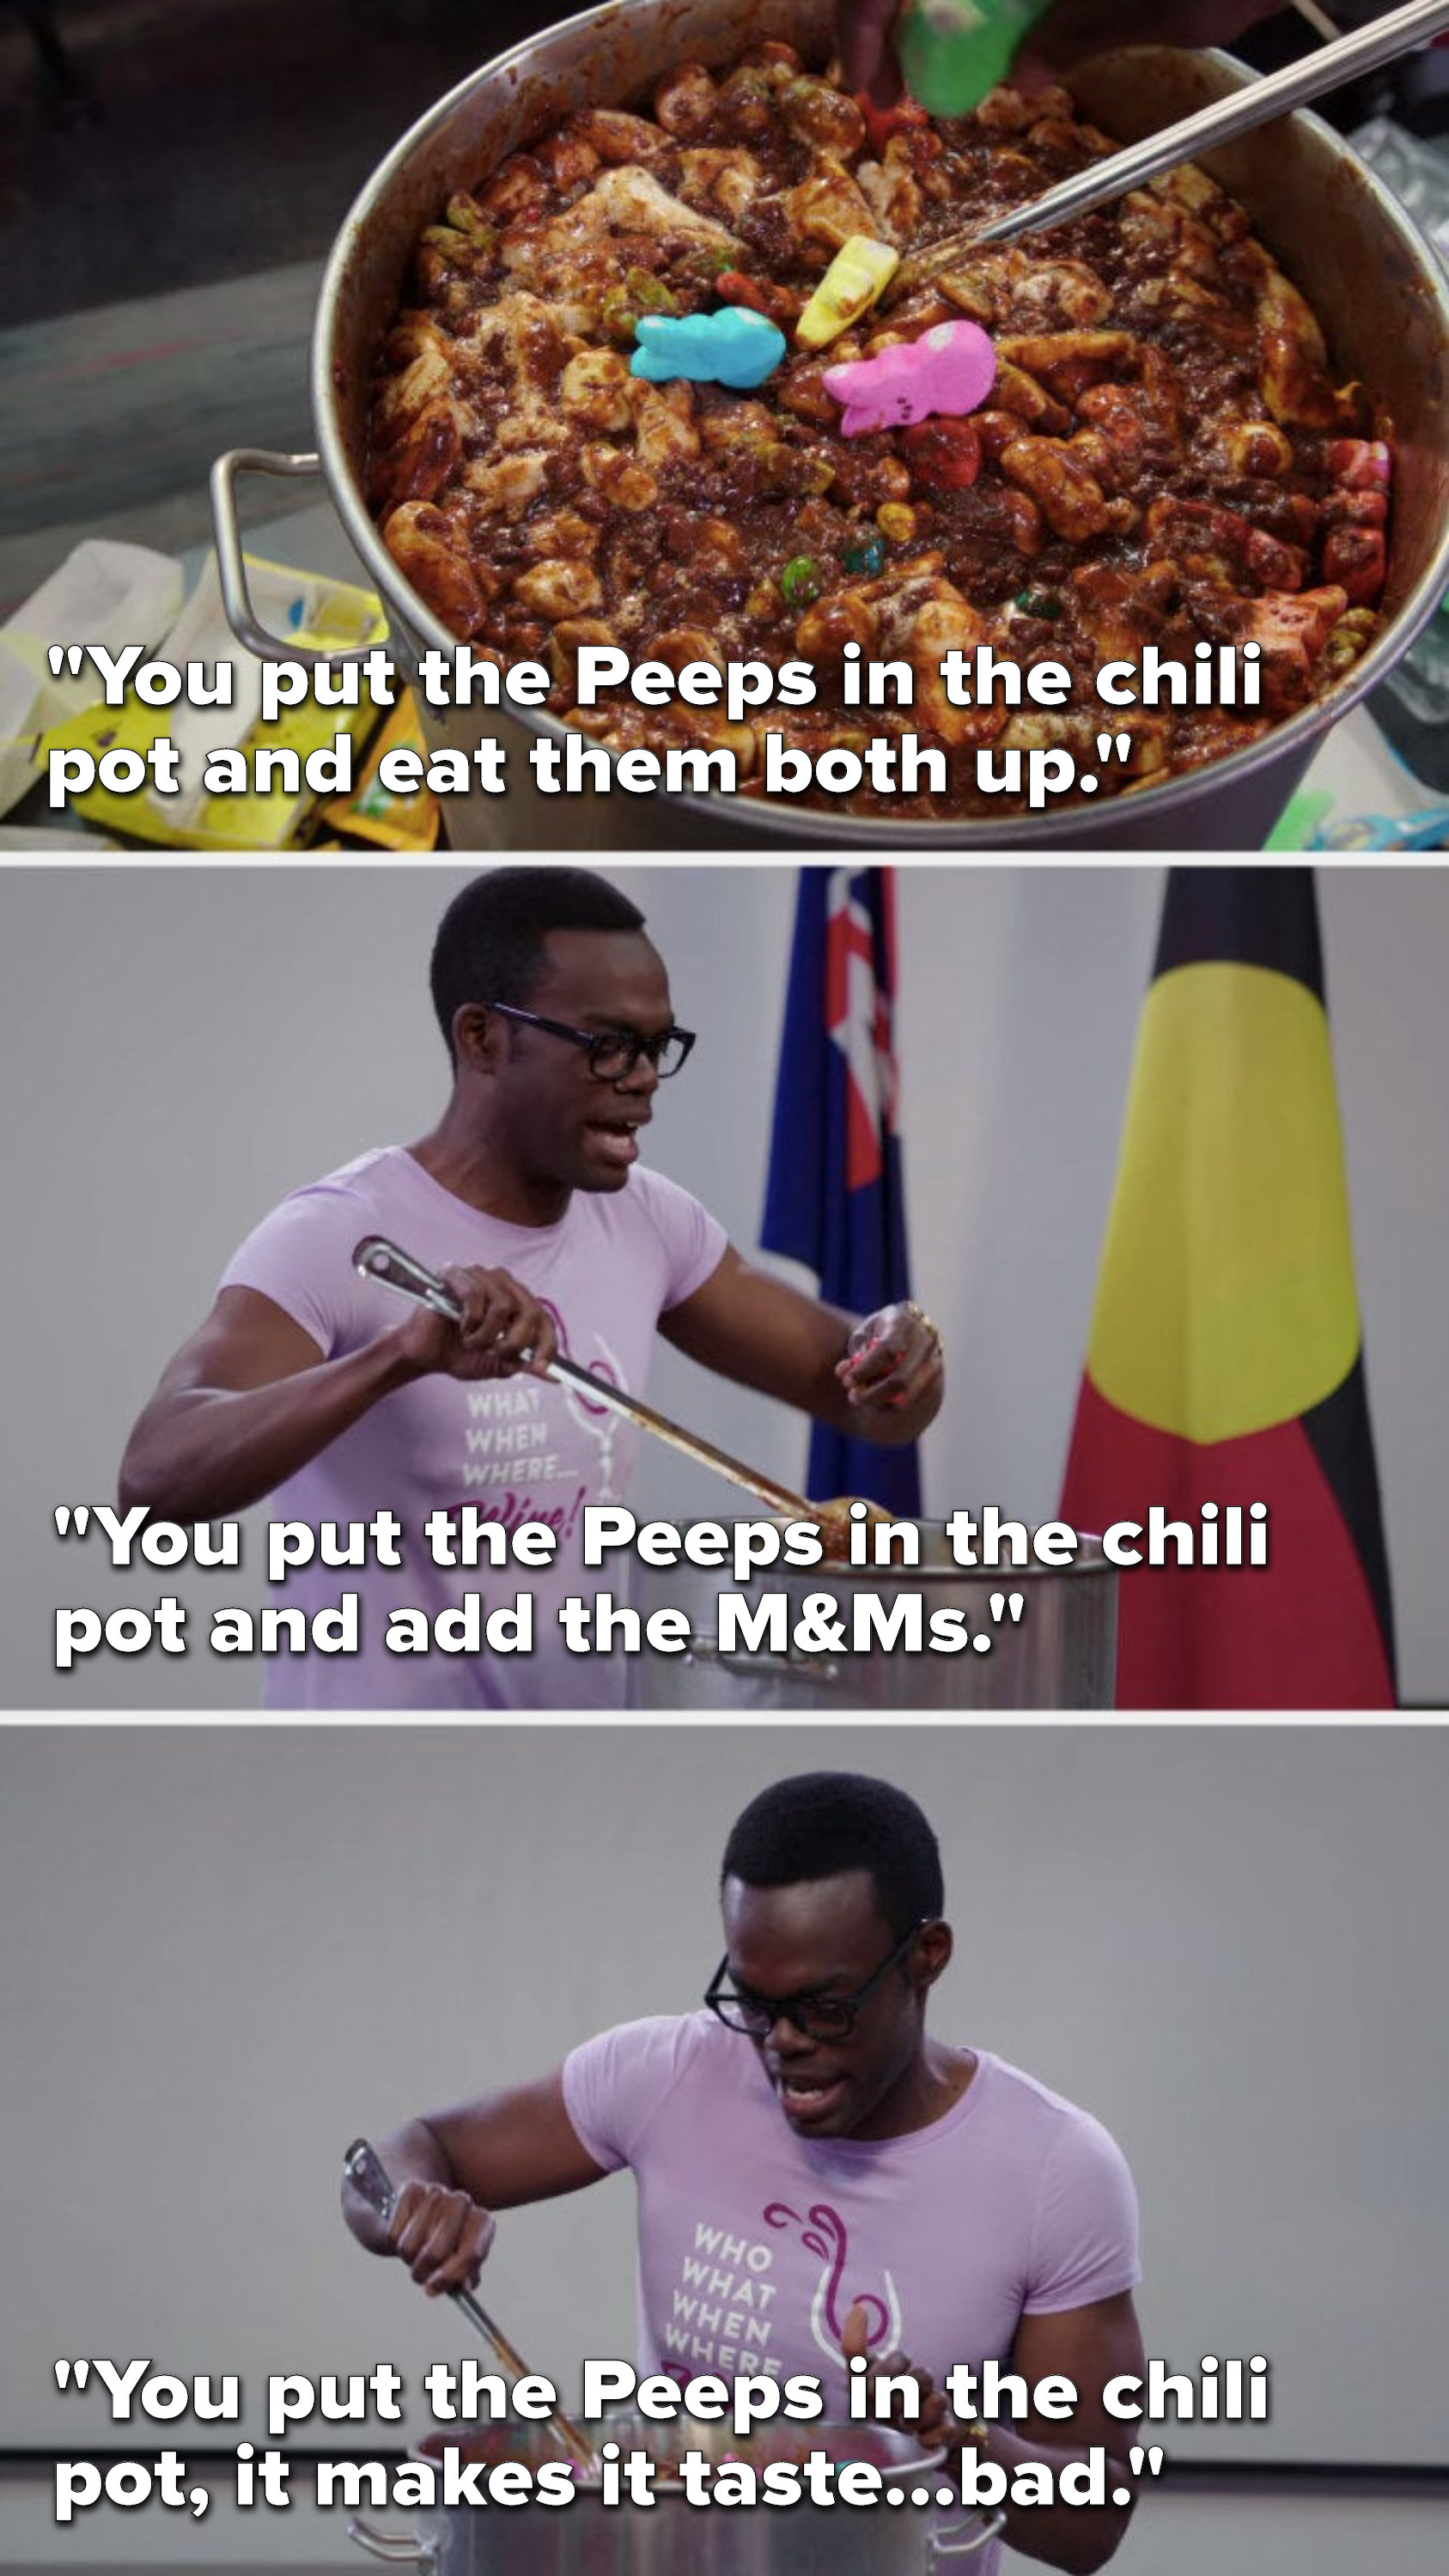 Chidi sings, &quot;You put the Peeps in the chili pot and eat them both up, you put the Peeps in the chili pot and add the M&amp;Ms, you put the Peeps in the chili pot, it makes it taste...bad&quot;